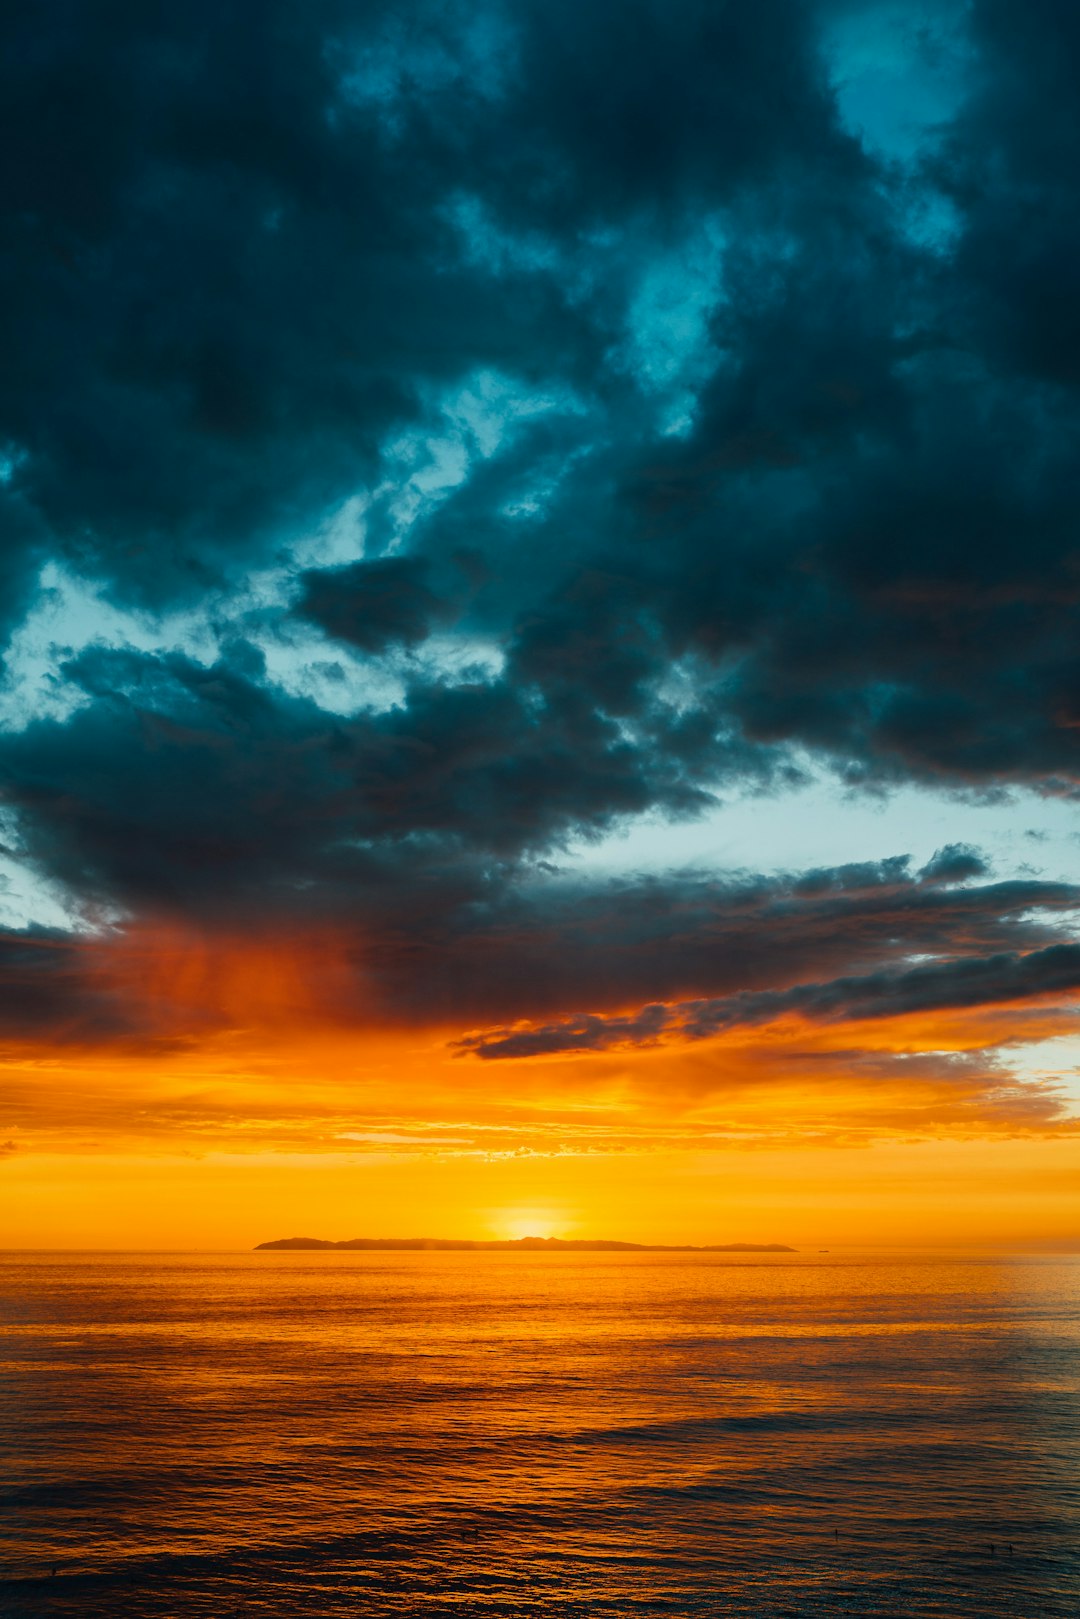 green and black clouds partly covering orange sky over sea at sunset